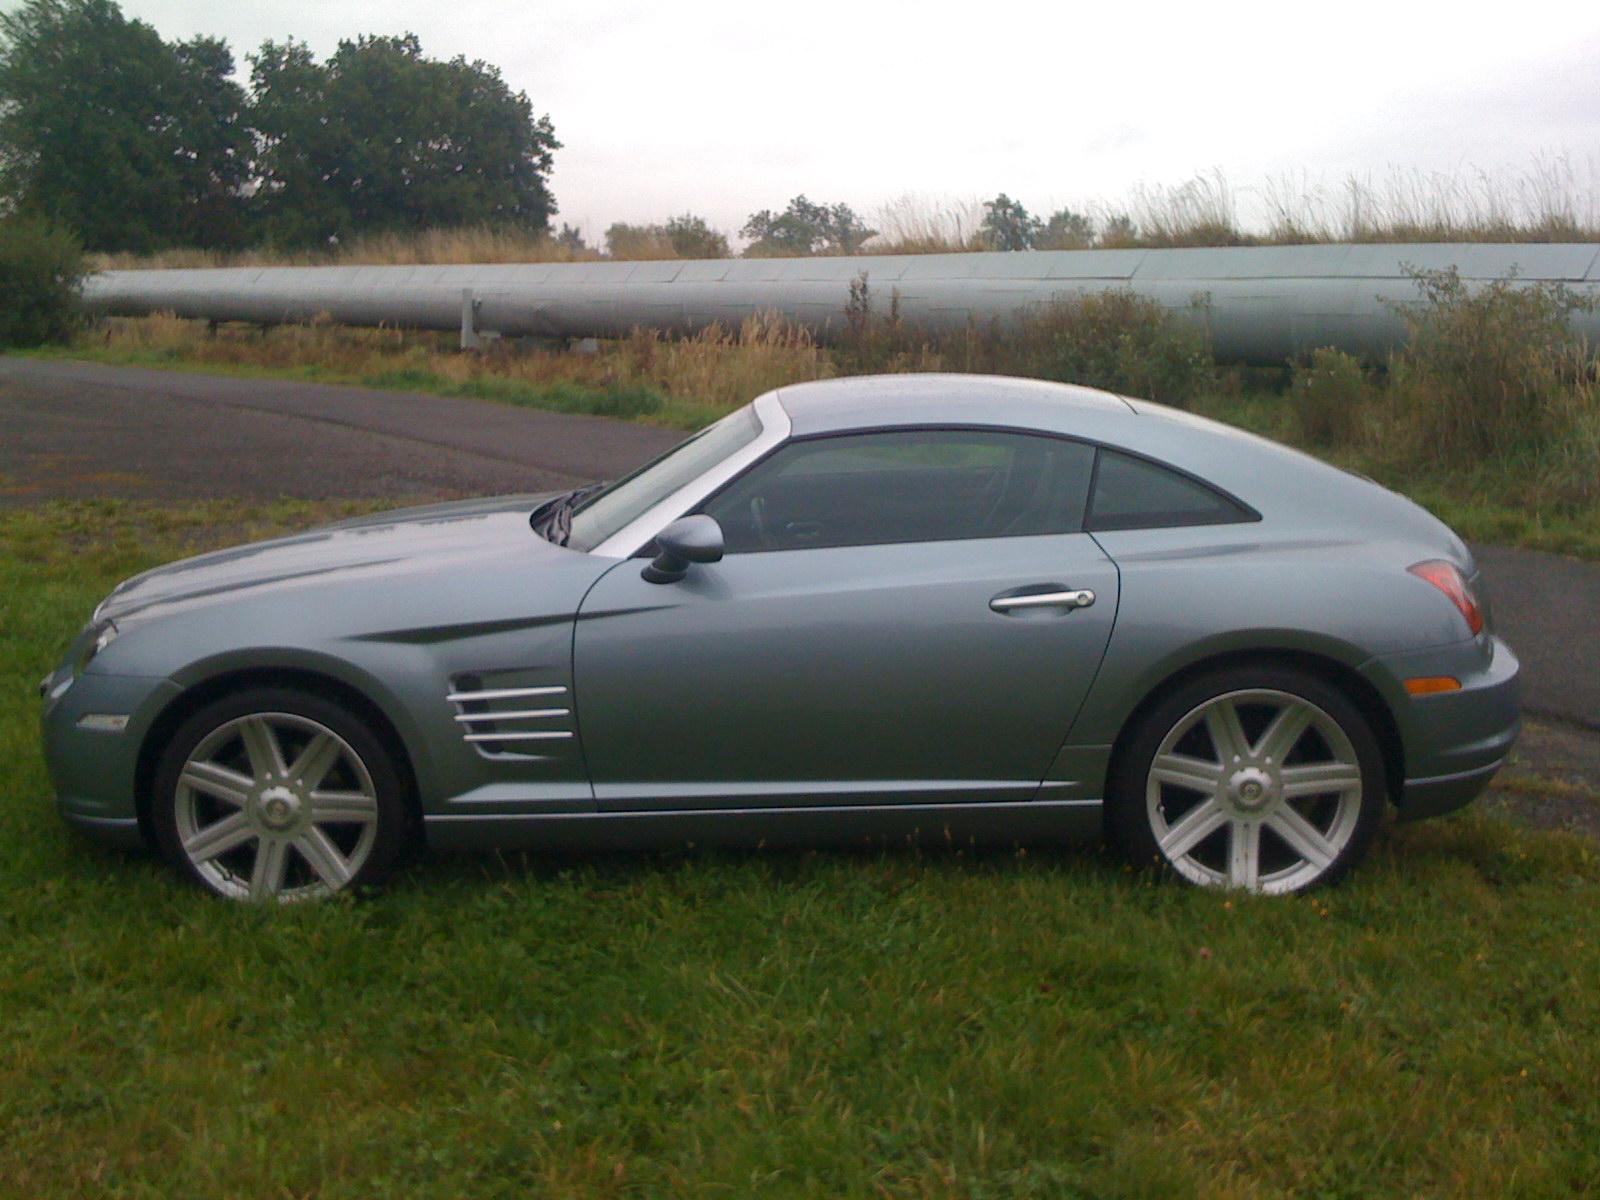 Chrysler crossfire owners club